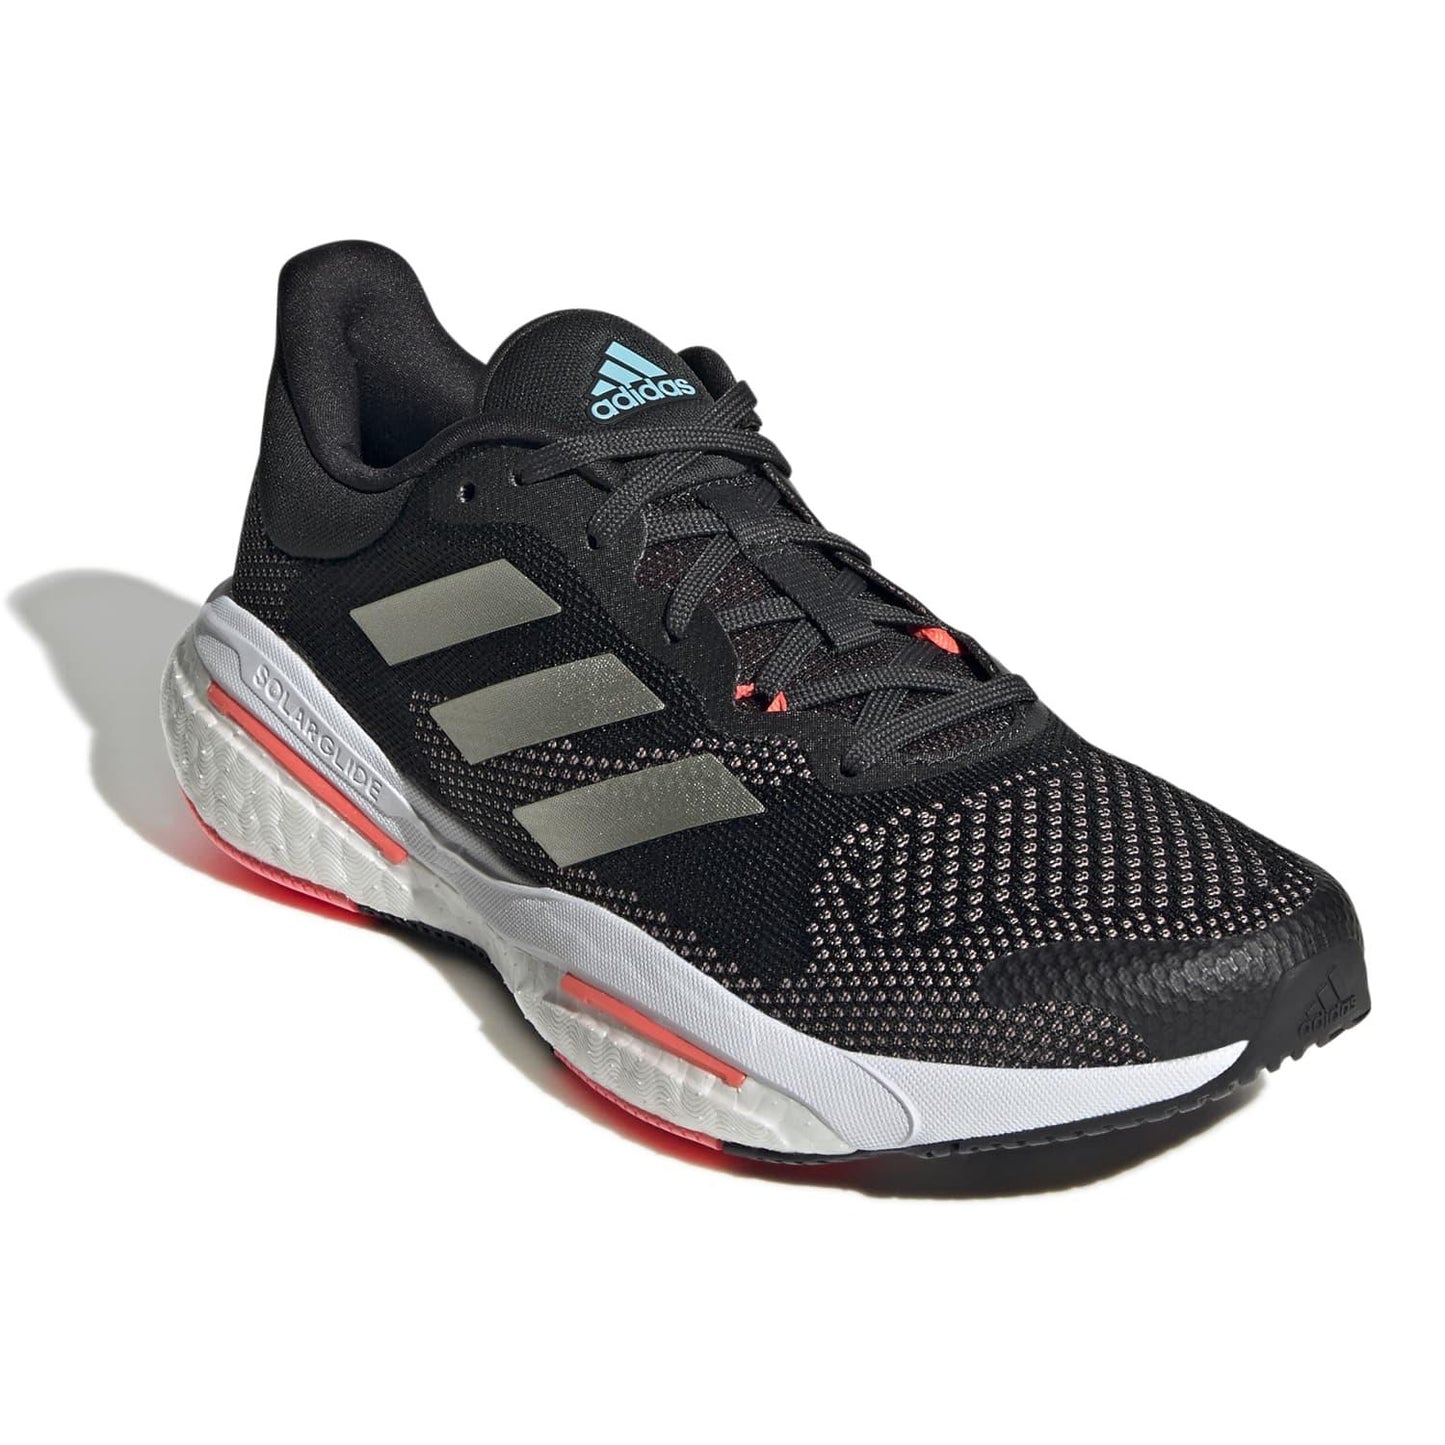 Adidas Solarglide 5 Women's - The Sweat Shop